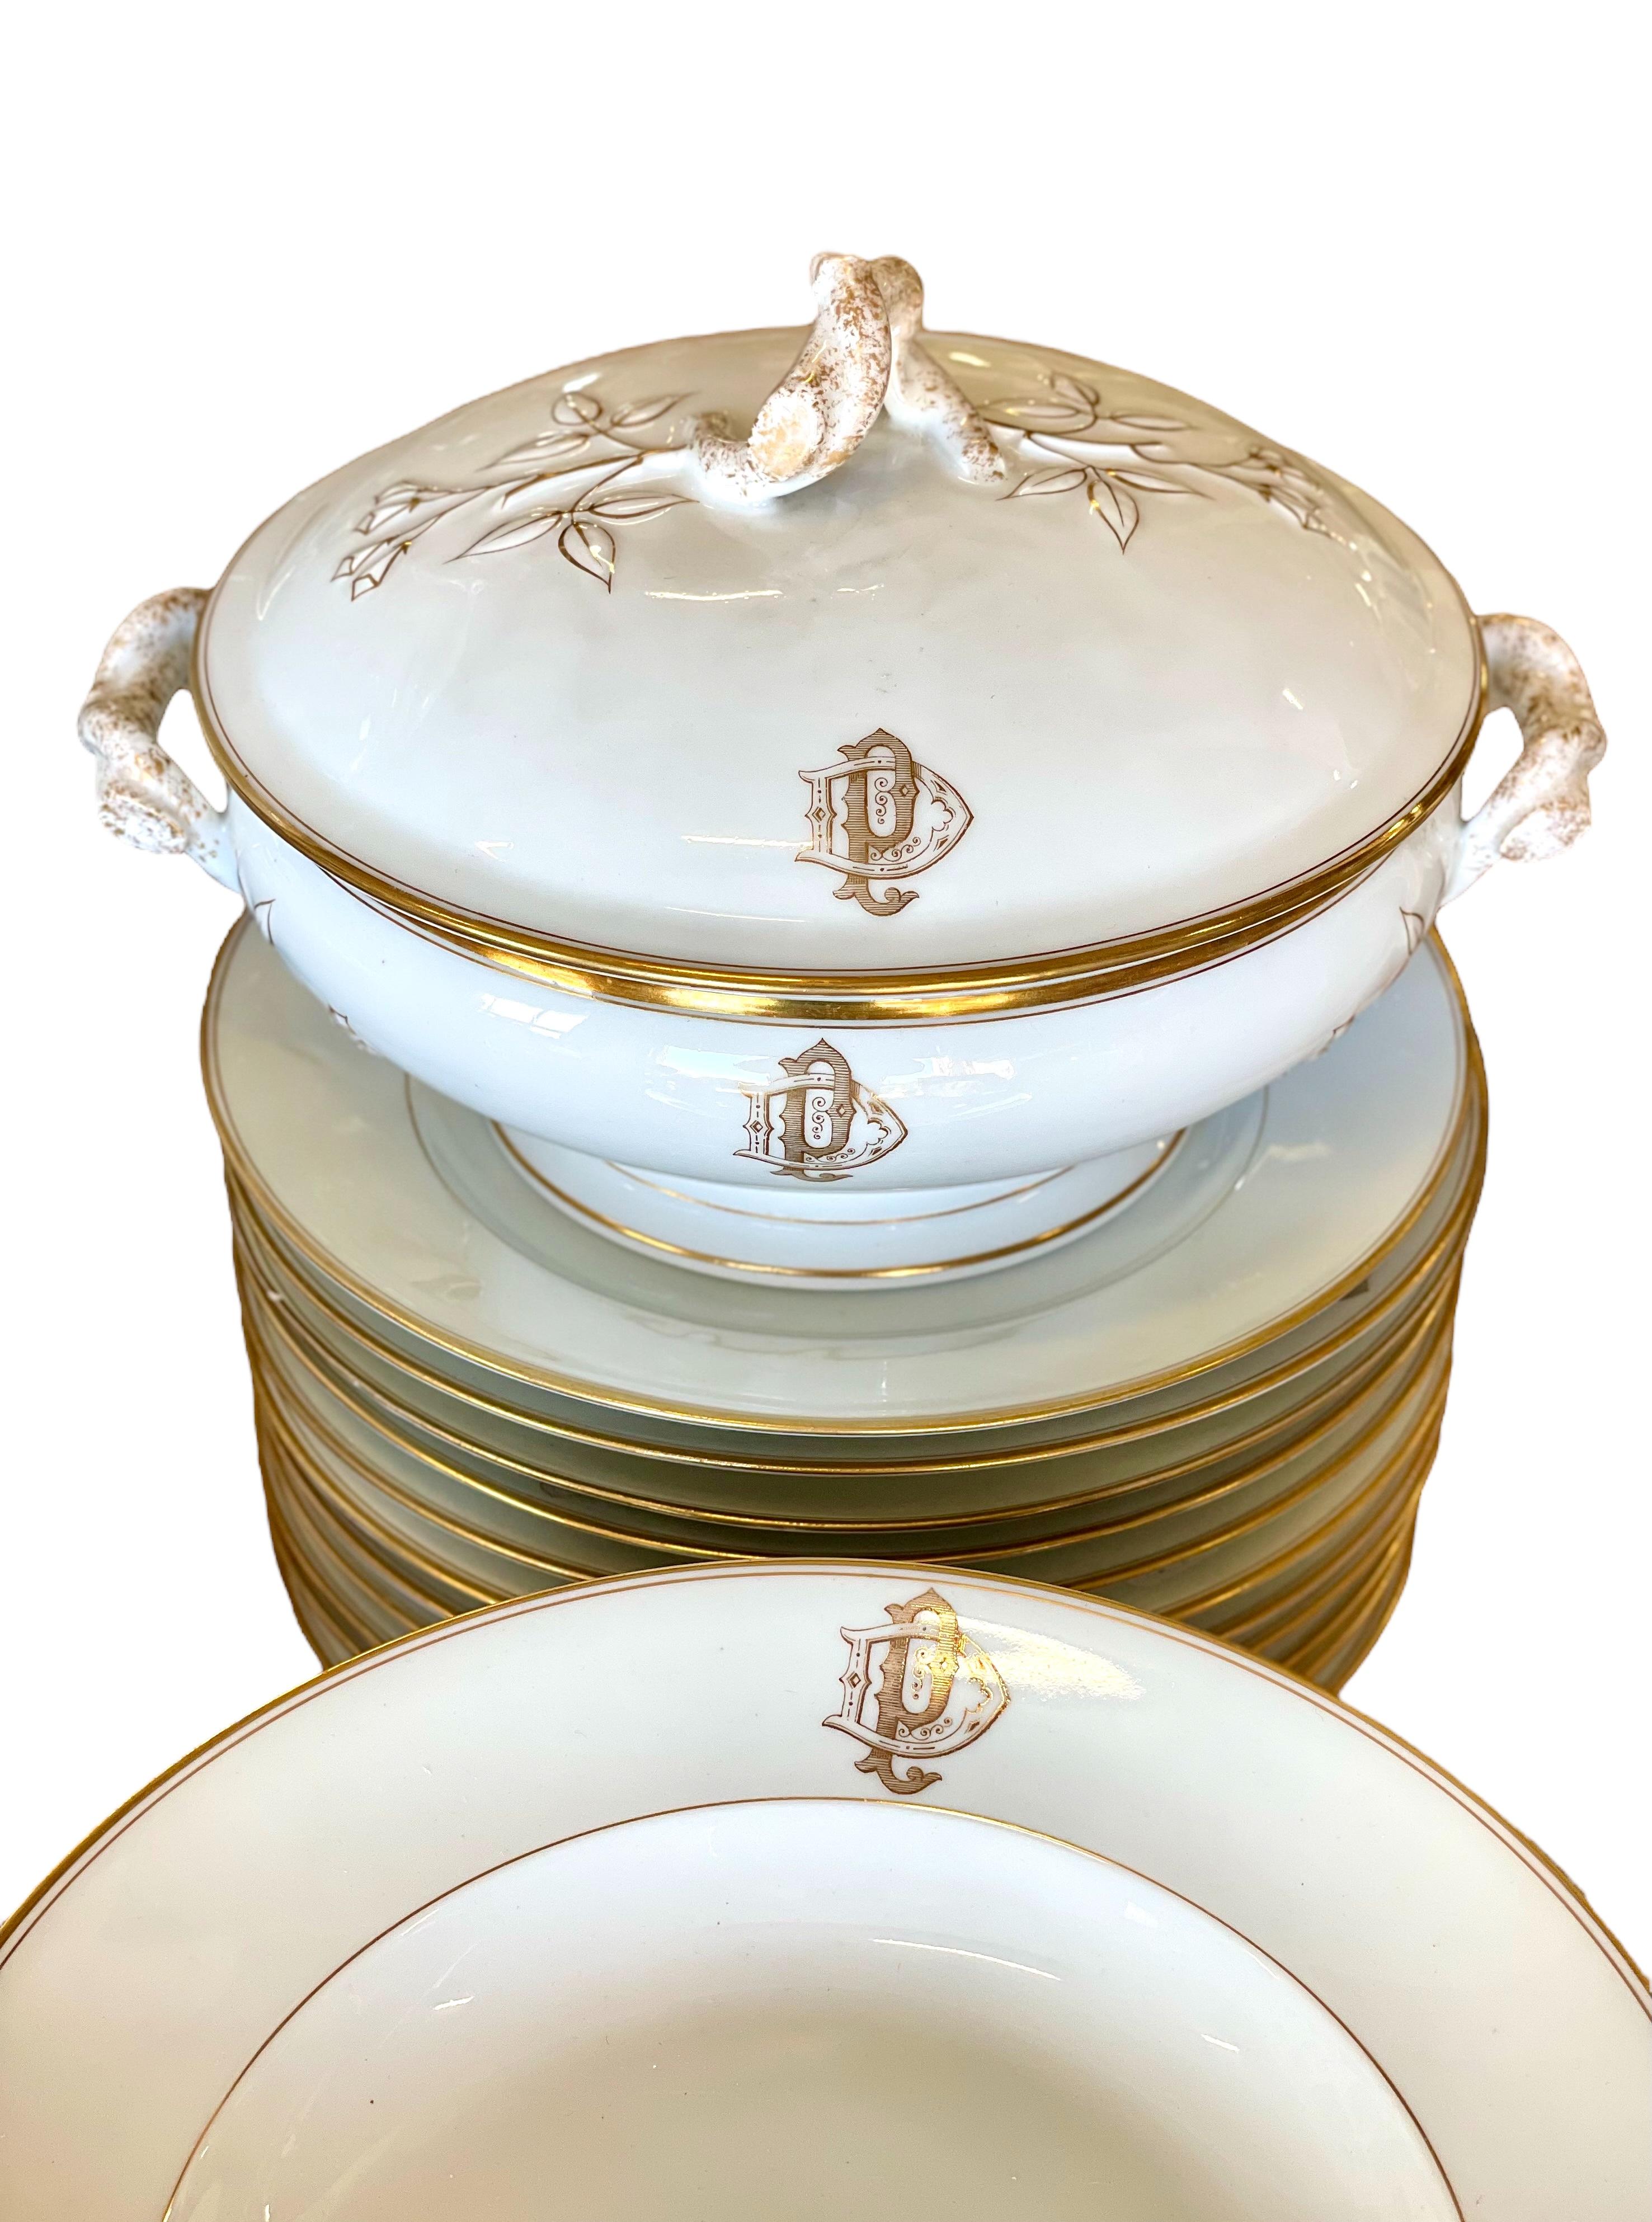 Limoges Porcelain Set of 50 Piece Dinner Service with Gilt Edges and Monogramme In Good Condition For Sale In LA CIOTAT, FR